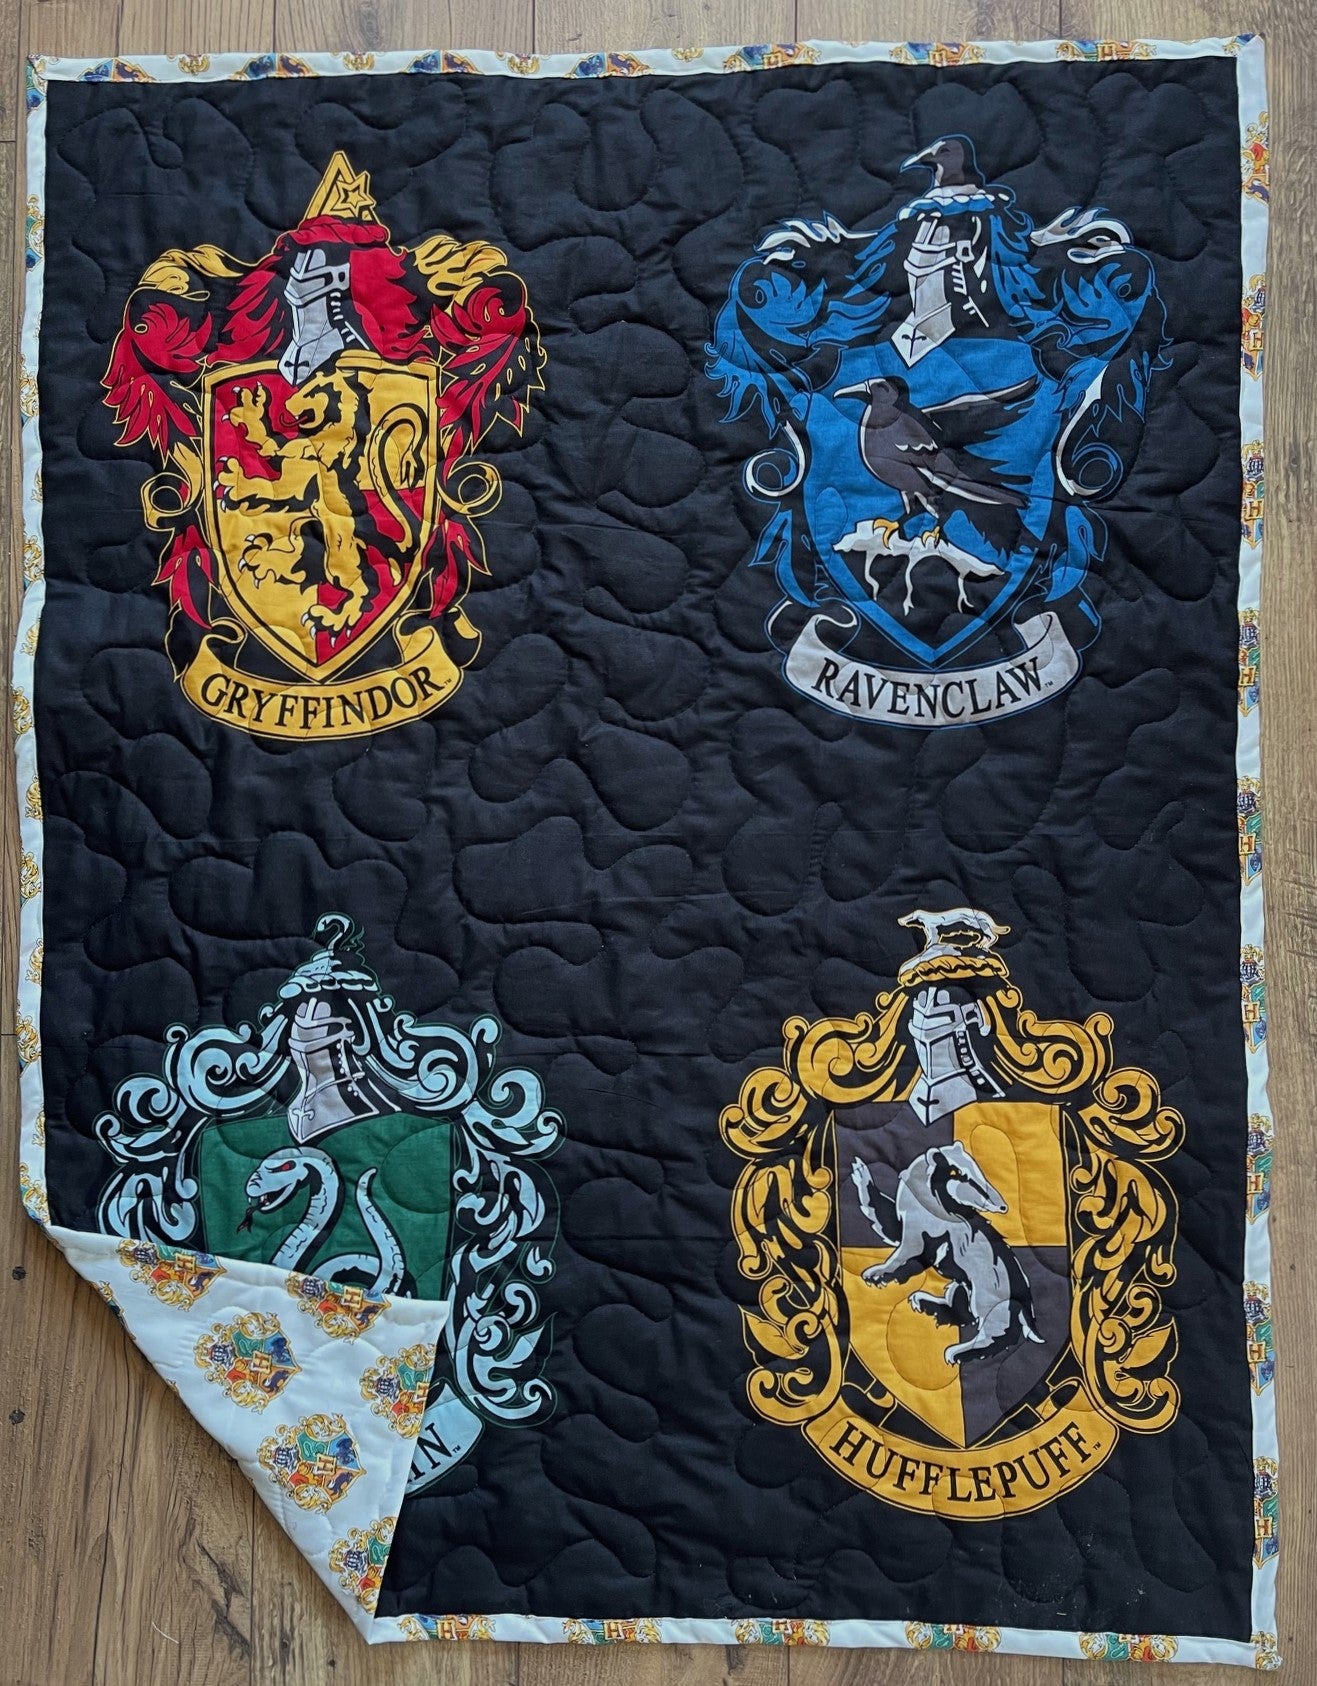 HARRY POTTER HOUSE CRESTS WIZARD WORLDS, RAVENCLAW, GRYFFINDOR, HUFFLEPUFF, SLYHERIN INSPIRED QUILTED BLANKET